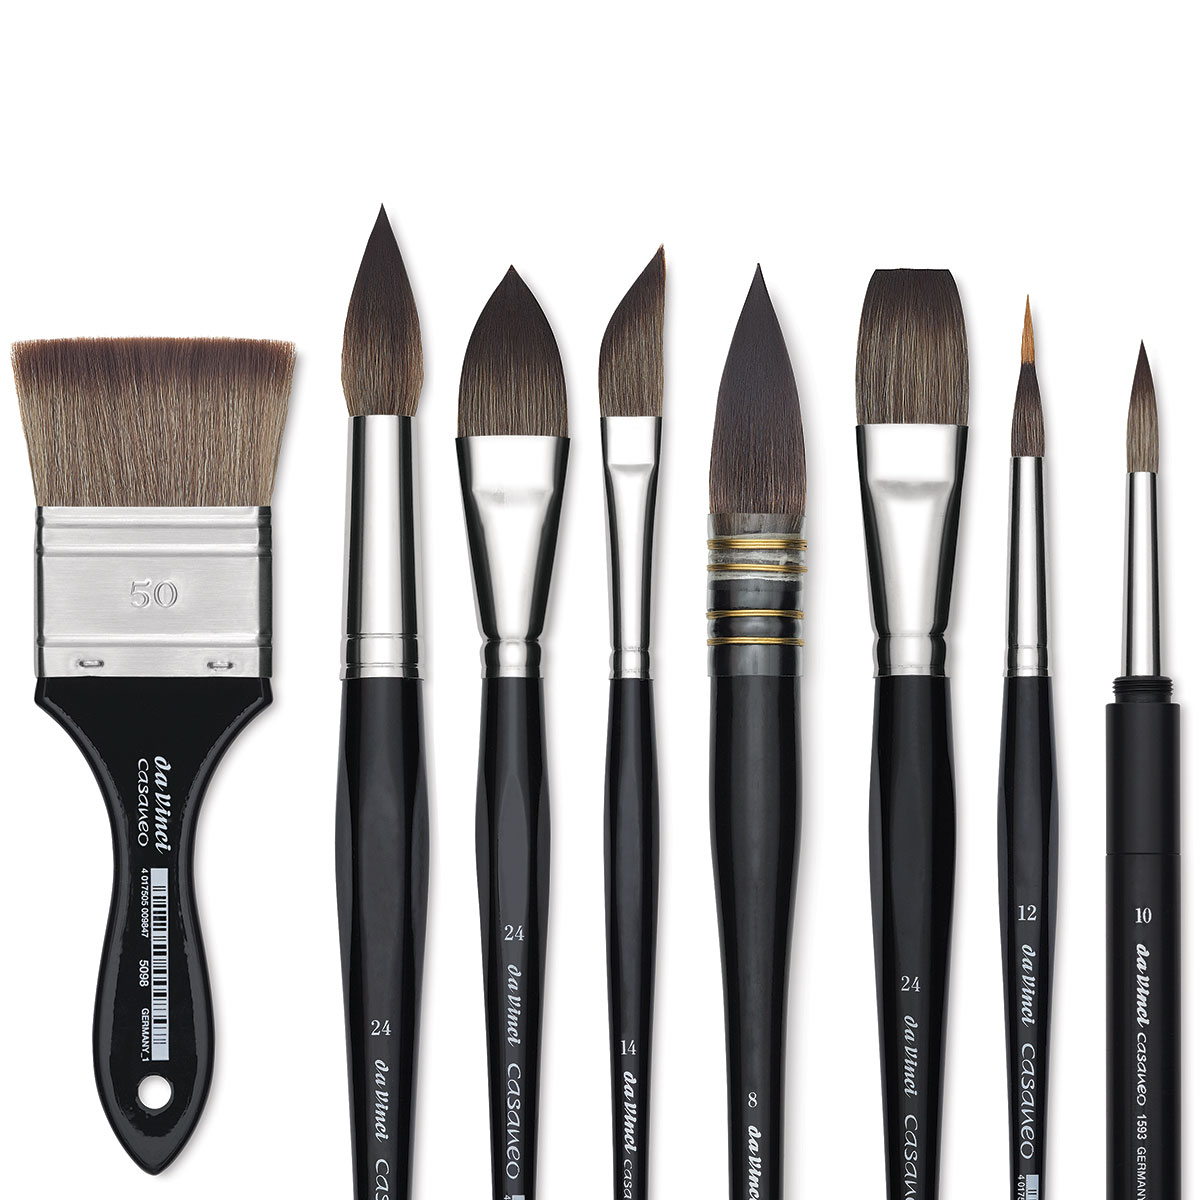 The Best and Most-Useful Paint Brushes